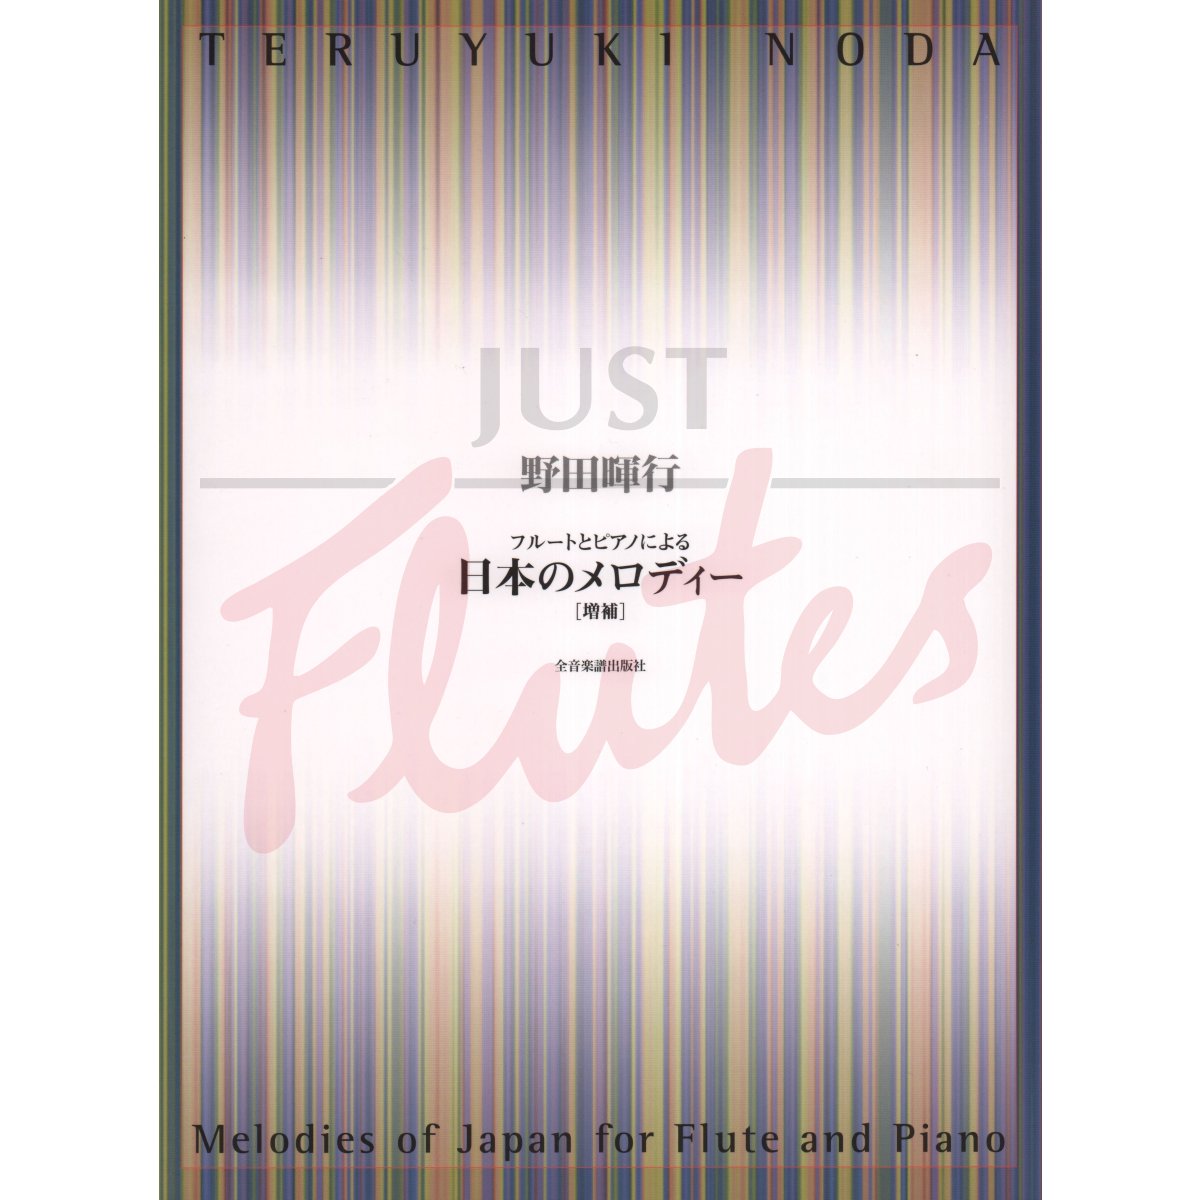 Melodies of Japan for Flute and Piano